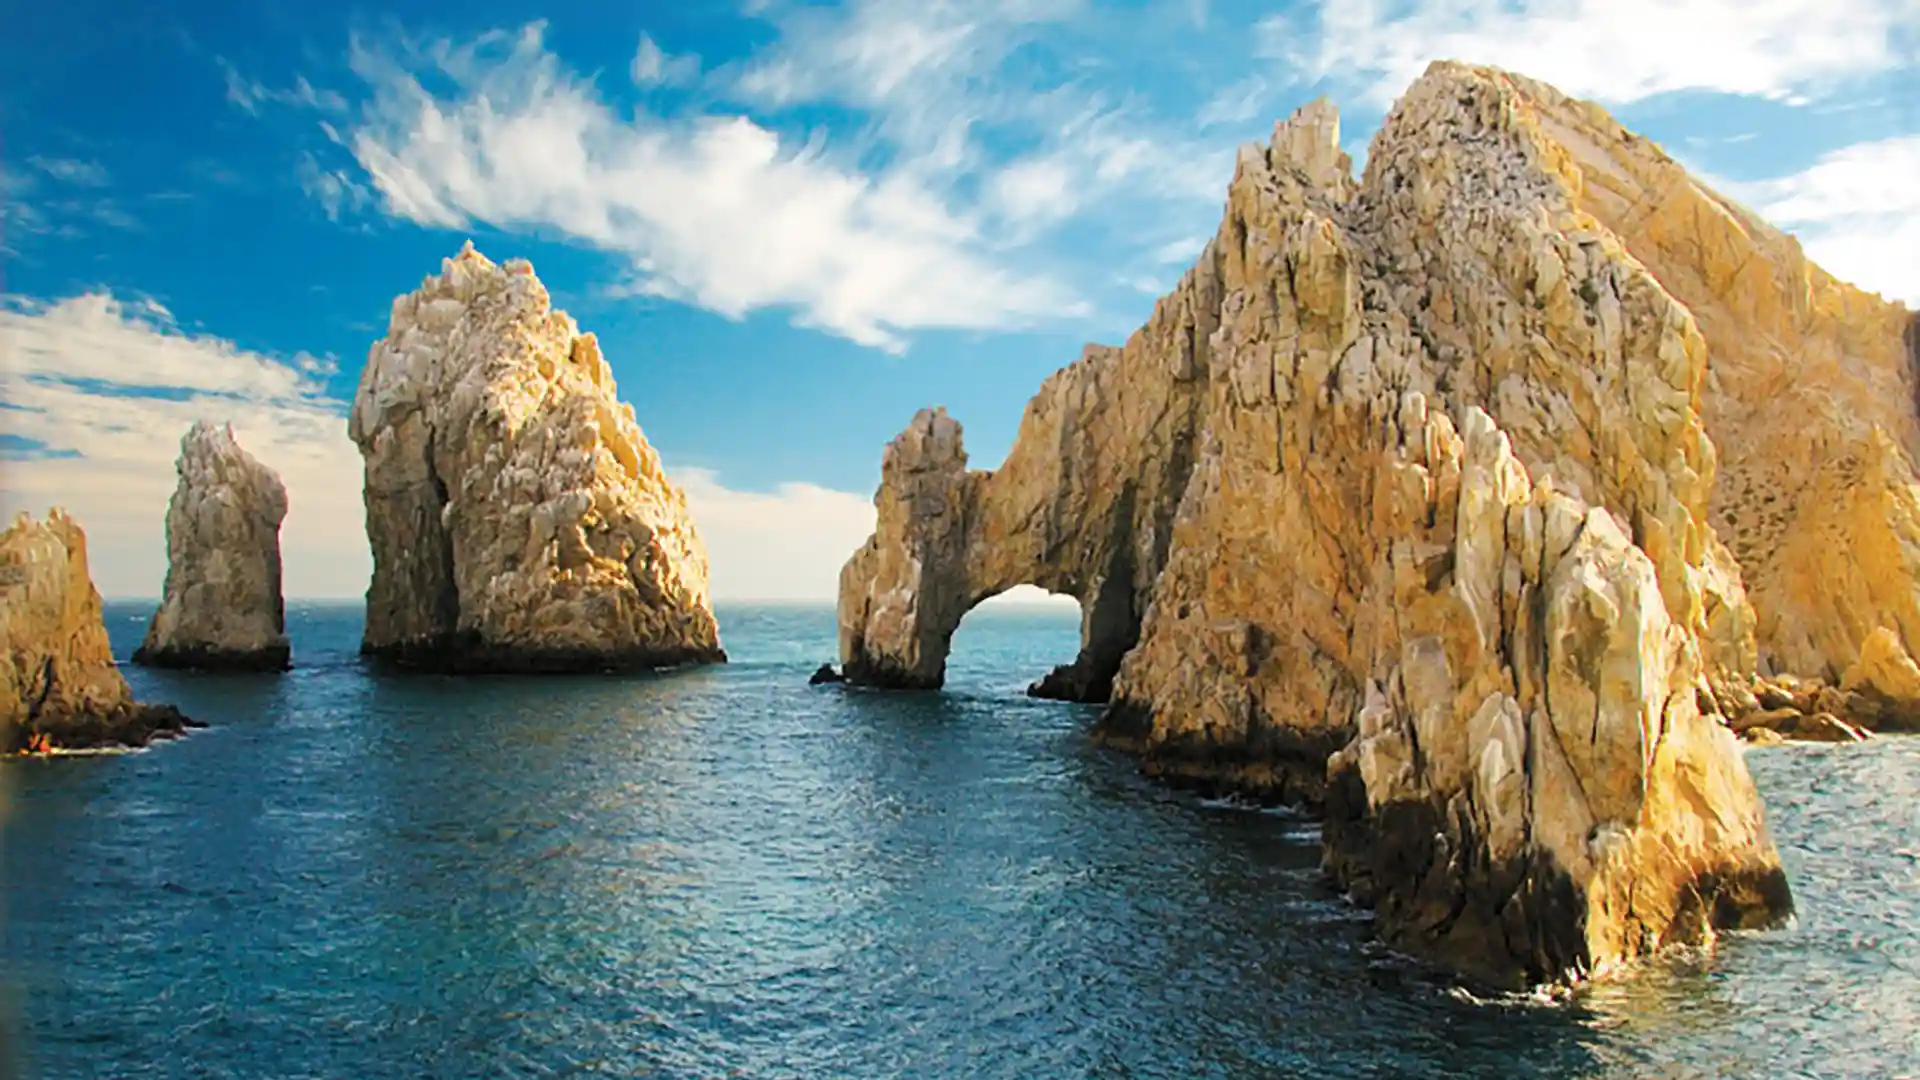 View of towering rock formations in blue waters near shore in Mexico.